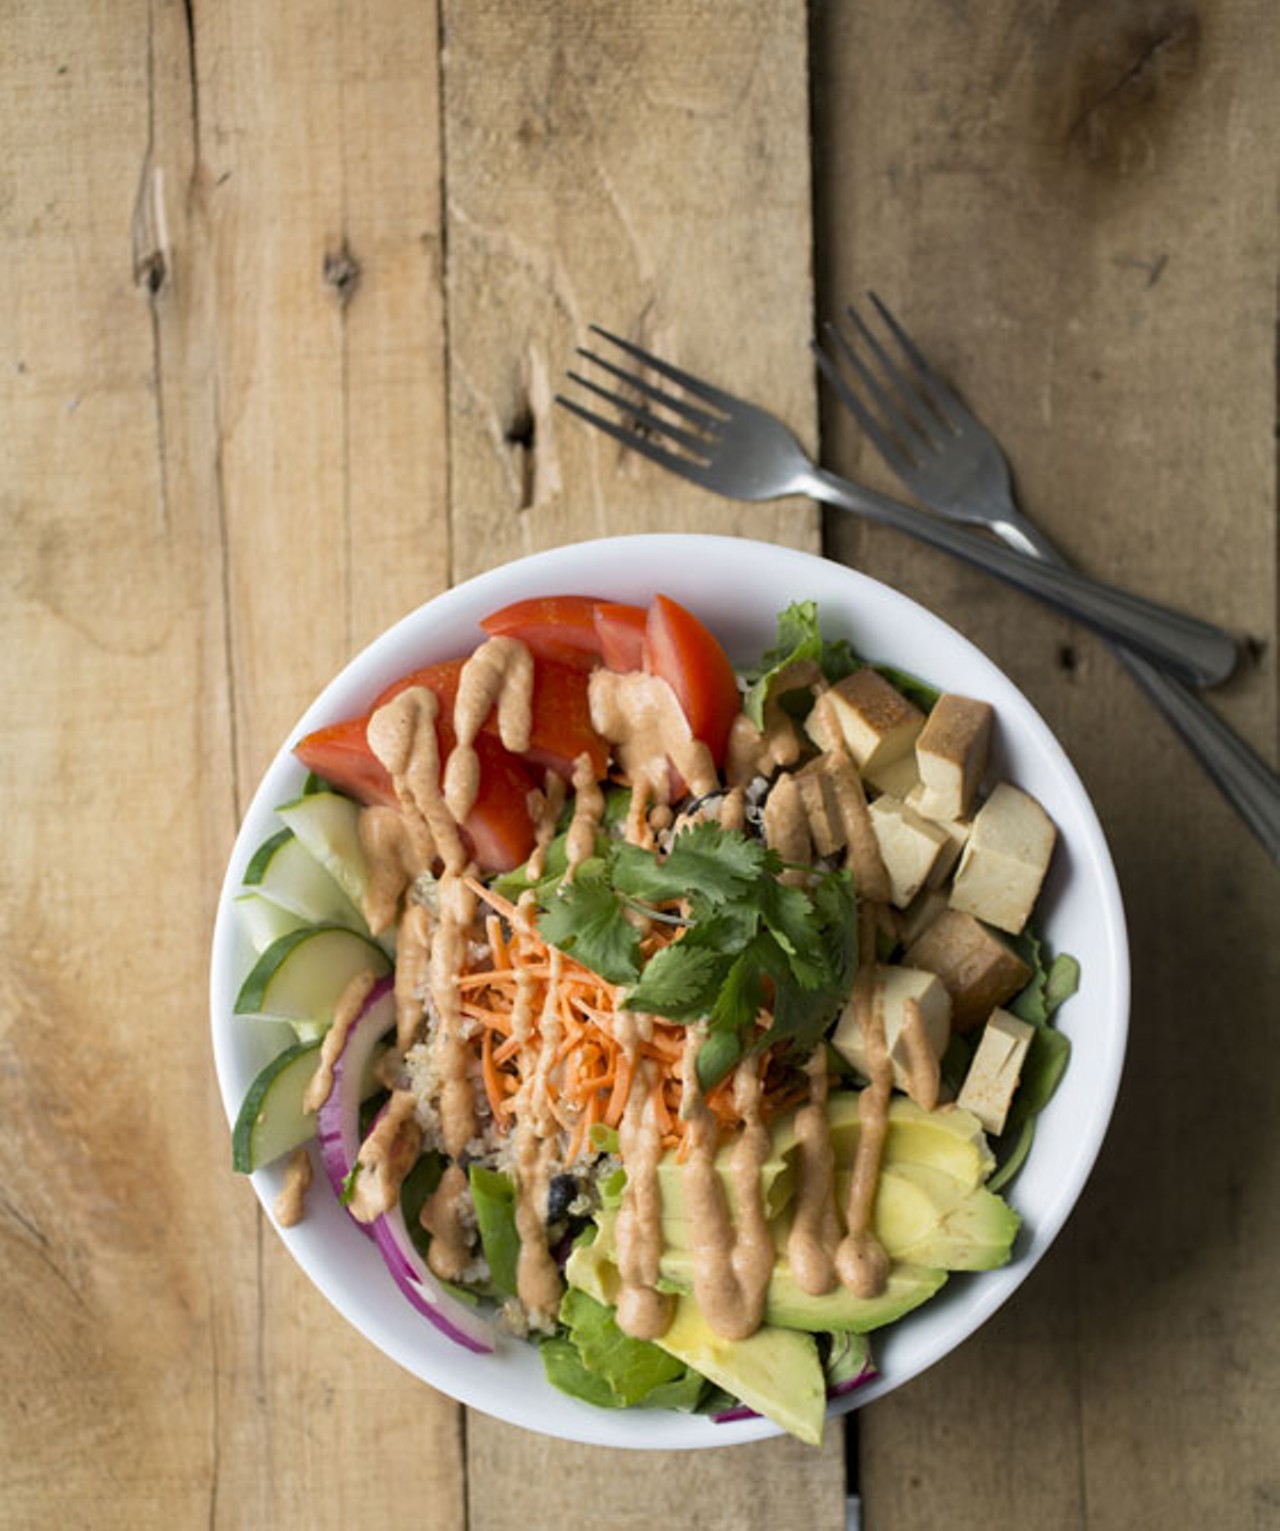 The "Power Protein Bowl" is a quinoa salad with organic marinated tofu, greens, cucumber, red onion, shredded carrot, tomato and fresh avocado with spicy chipotle sauce.